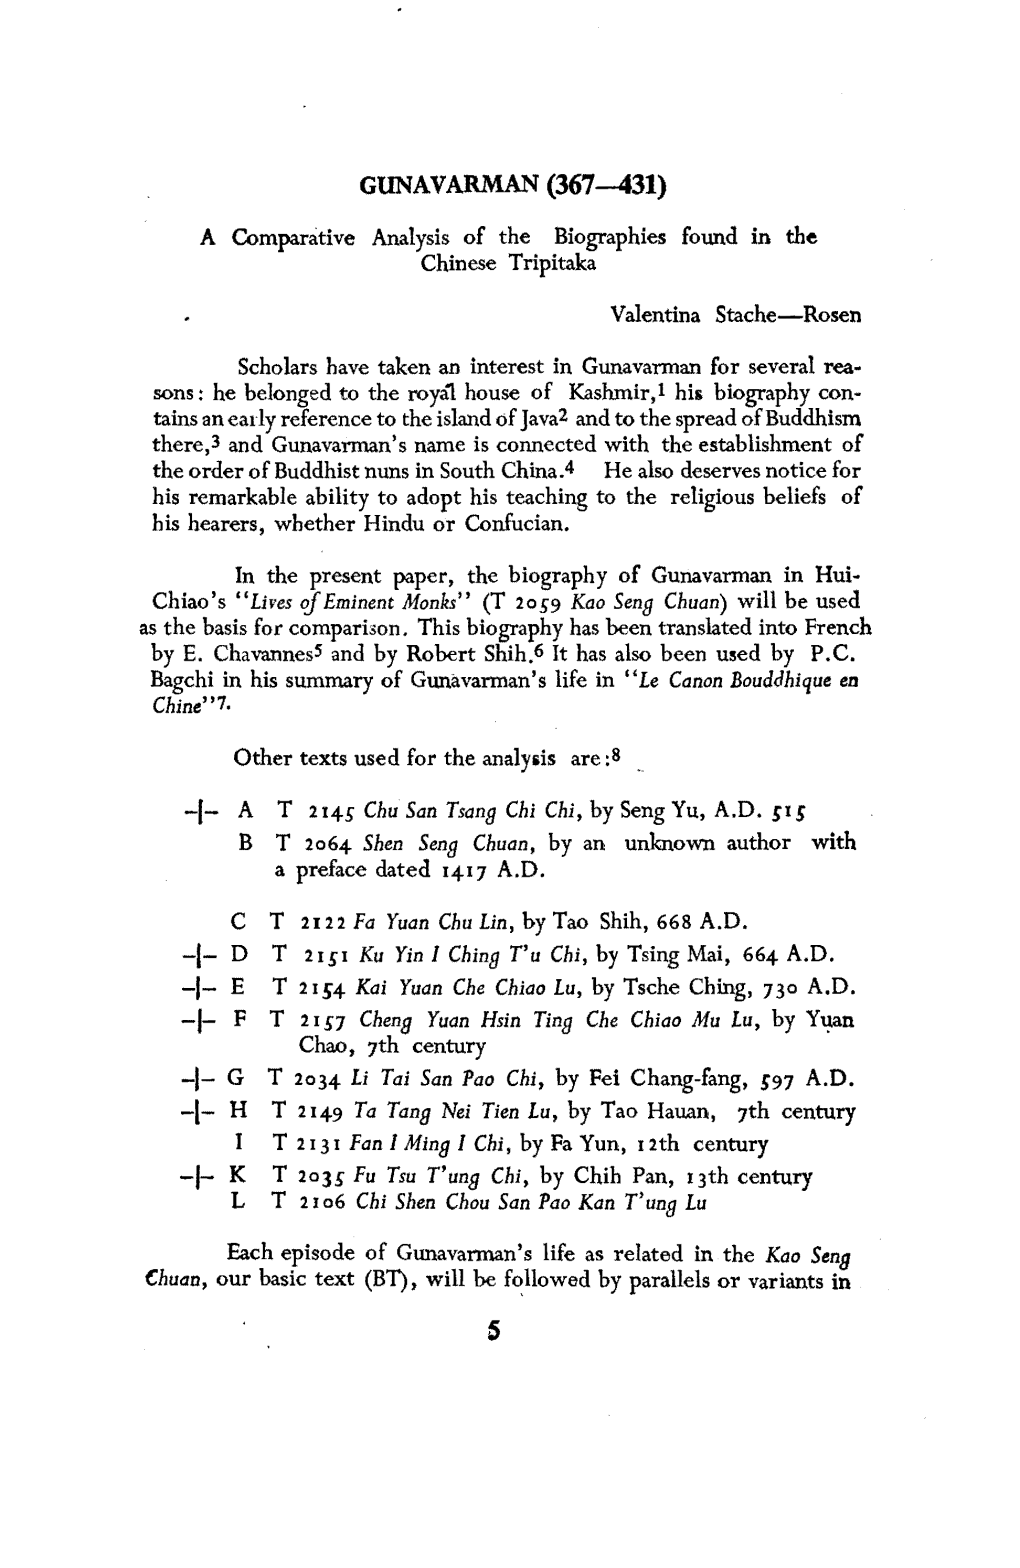 A Comparative Analysis of the Biographies Found in the Chinese Tripitaka